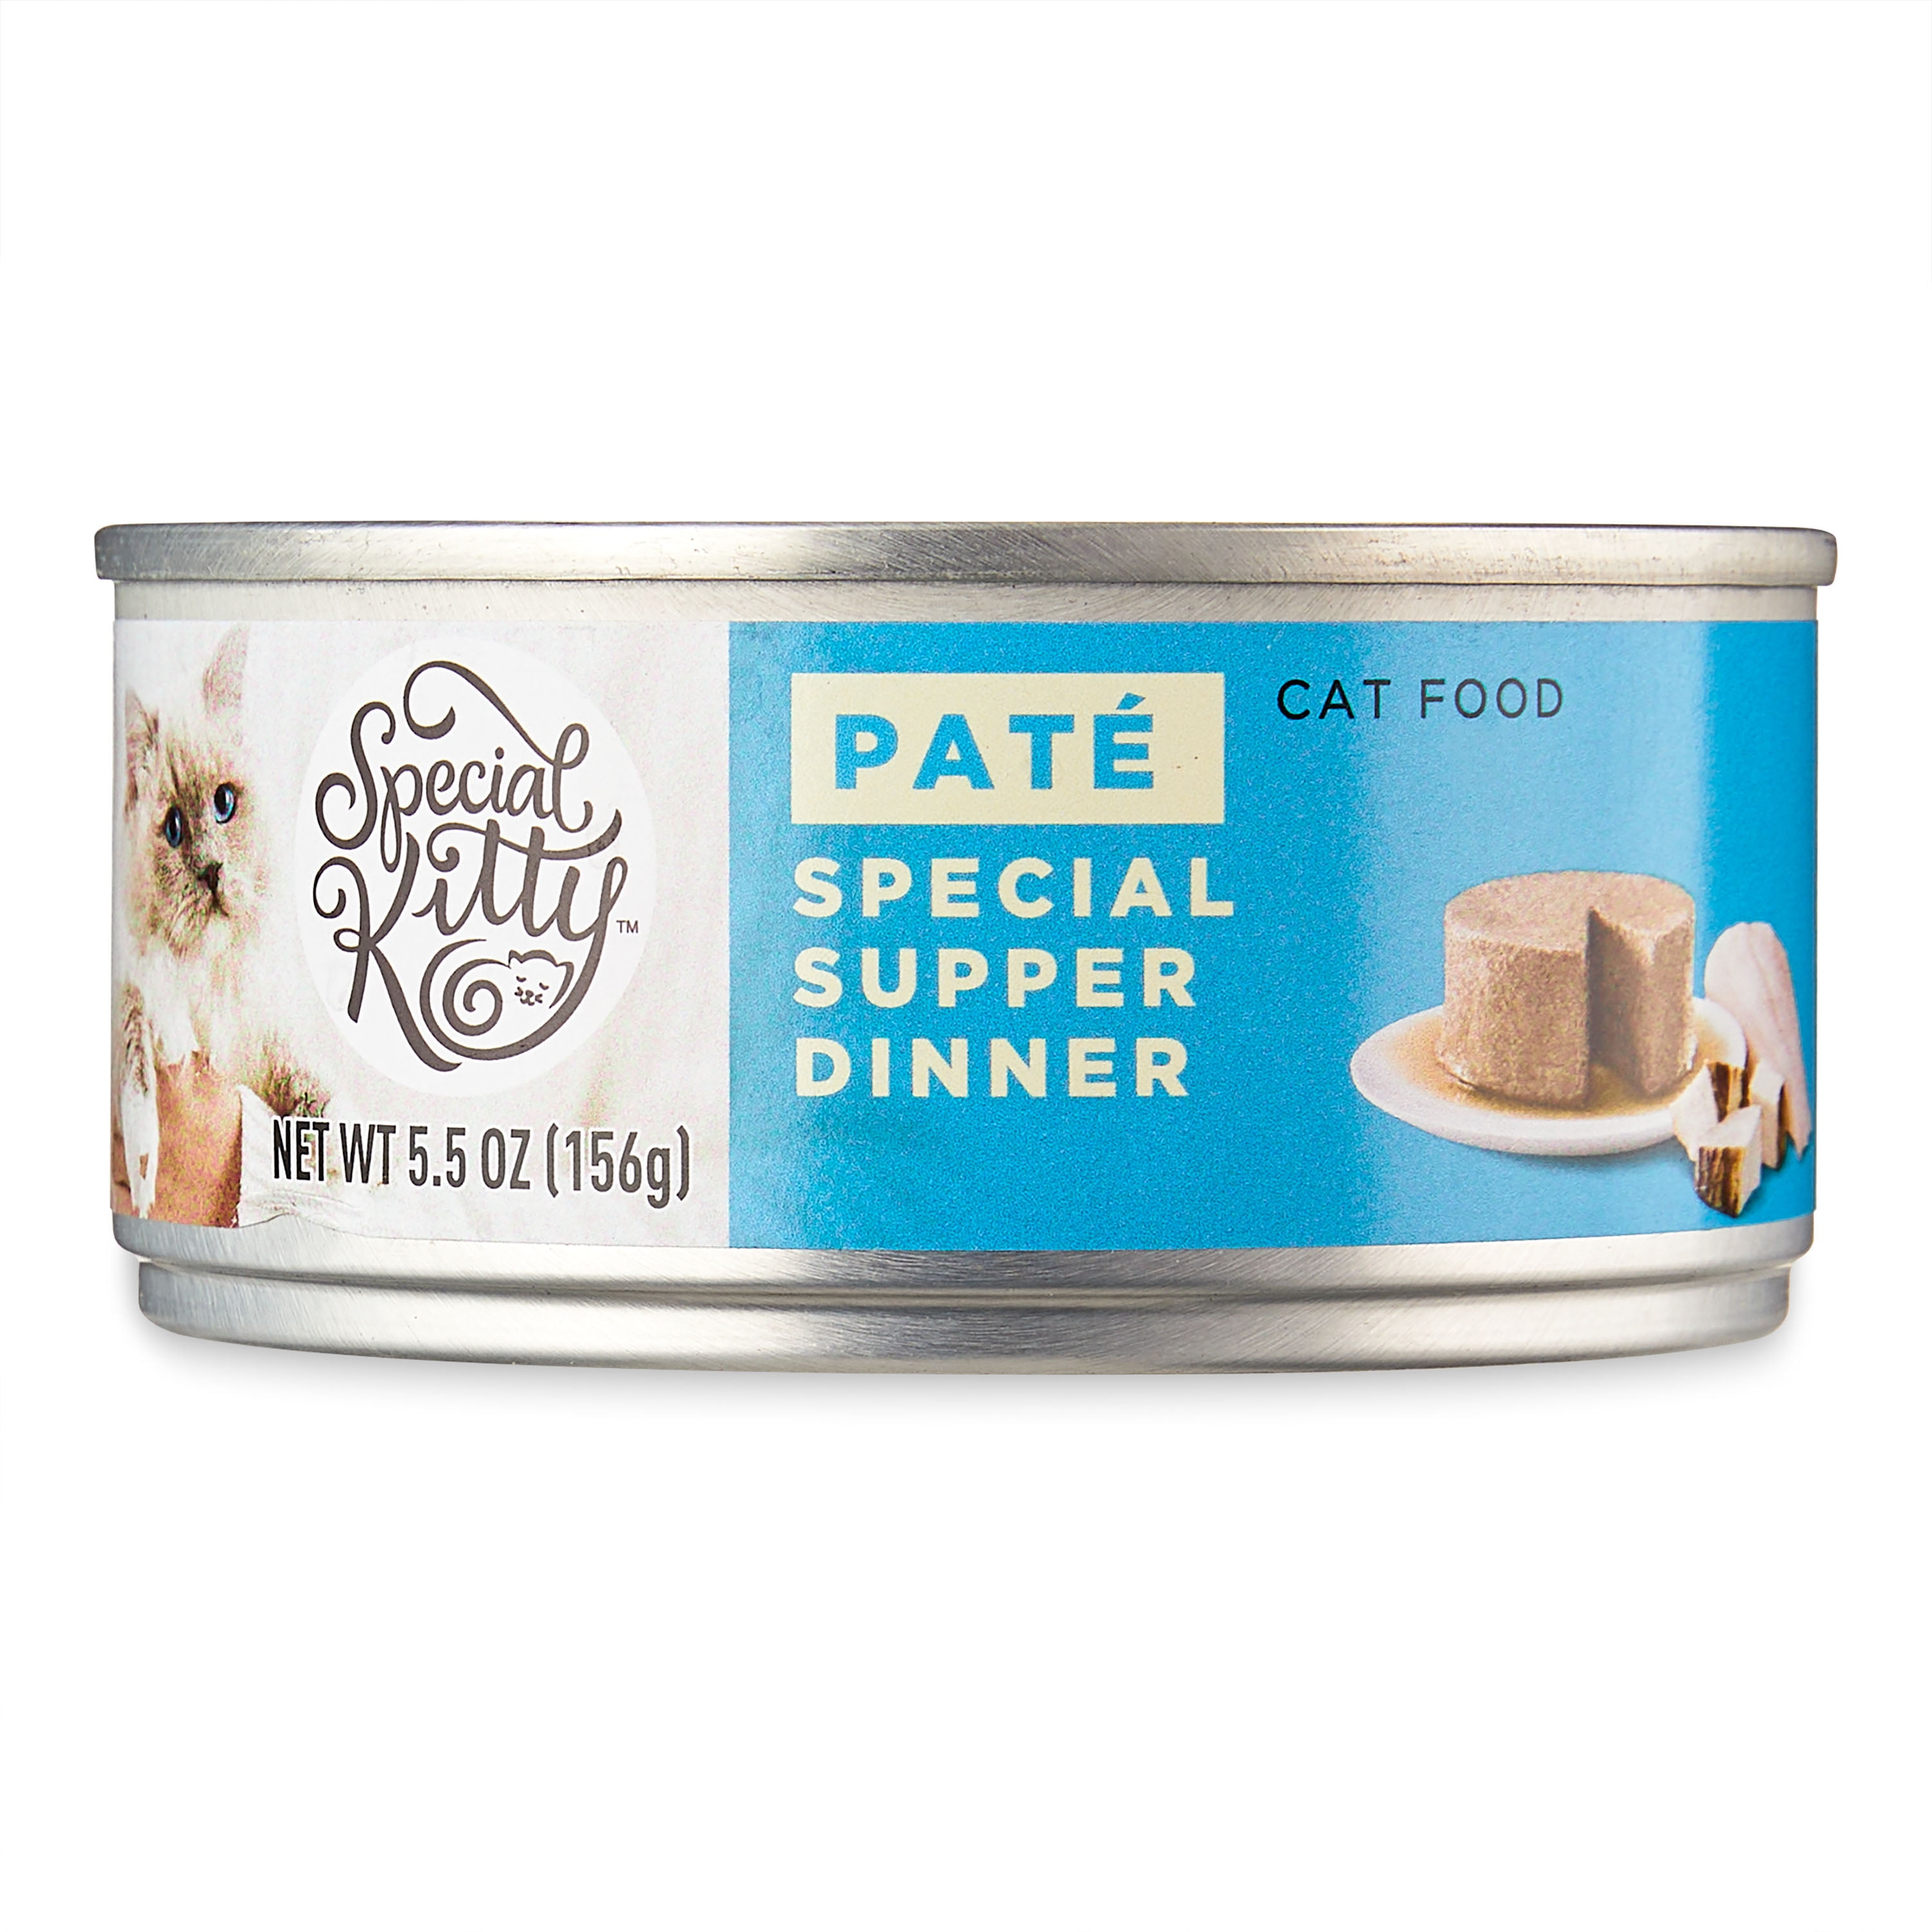 Special Kitty Special Supper Dinner Pate Wet Cat Food, 5.5 oz